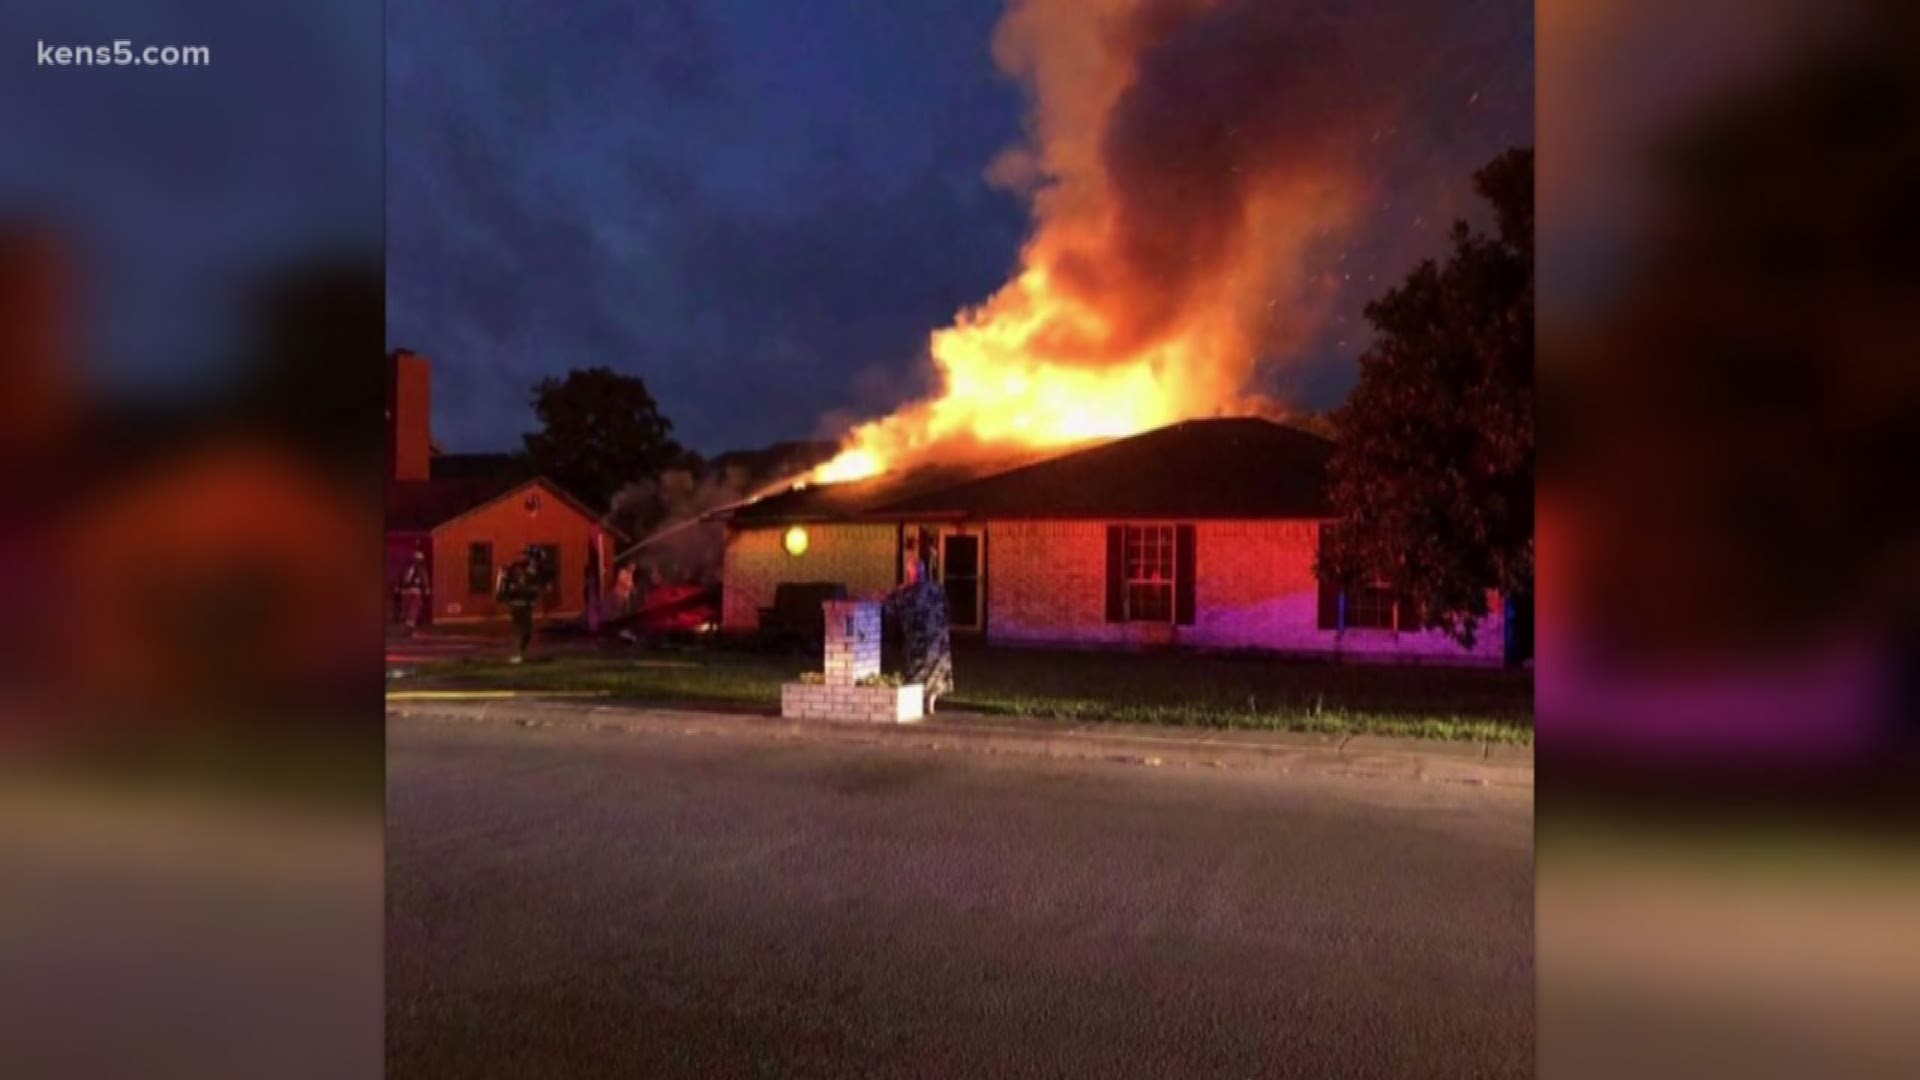 In Castroville, a 14-year-old boy is suspected of intentionally starting multiple fires over the last few months. The most recent one happened this morning.